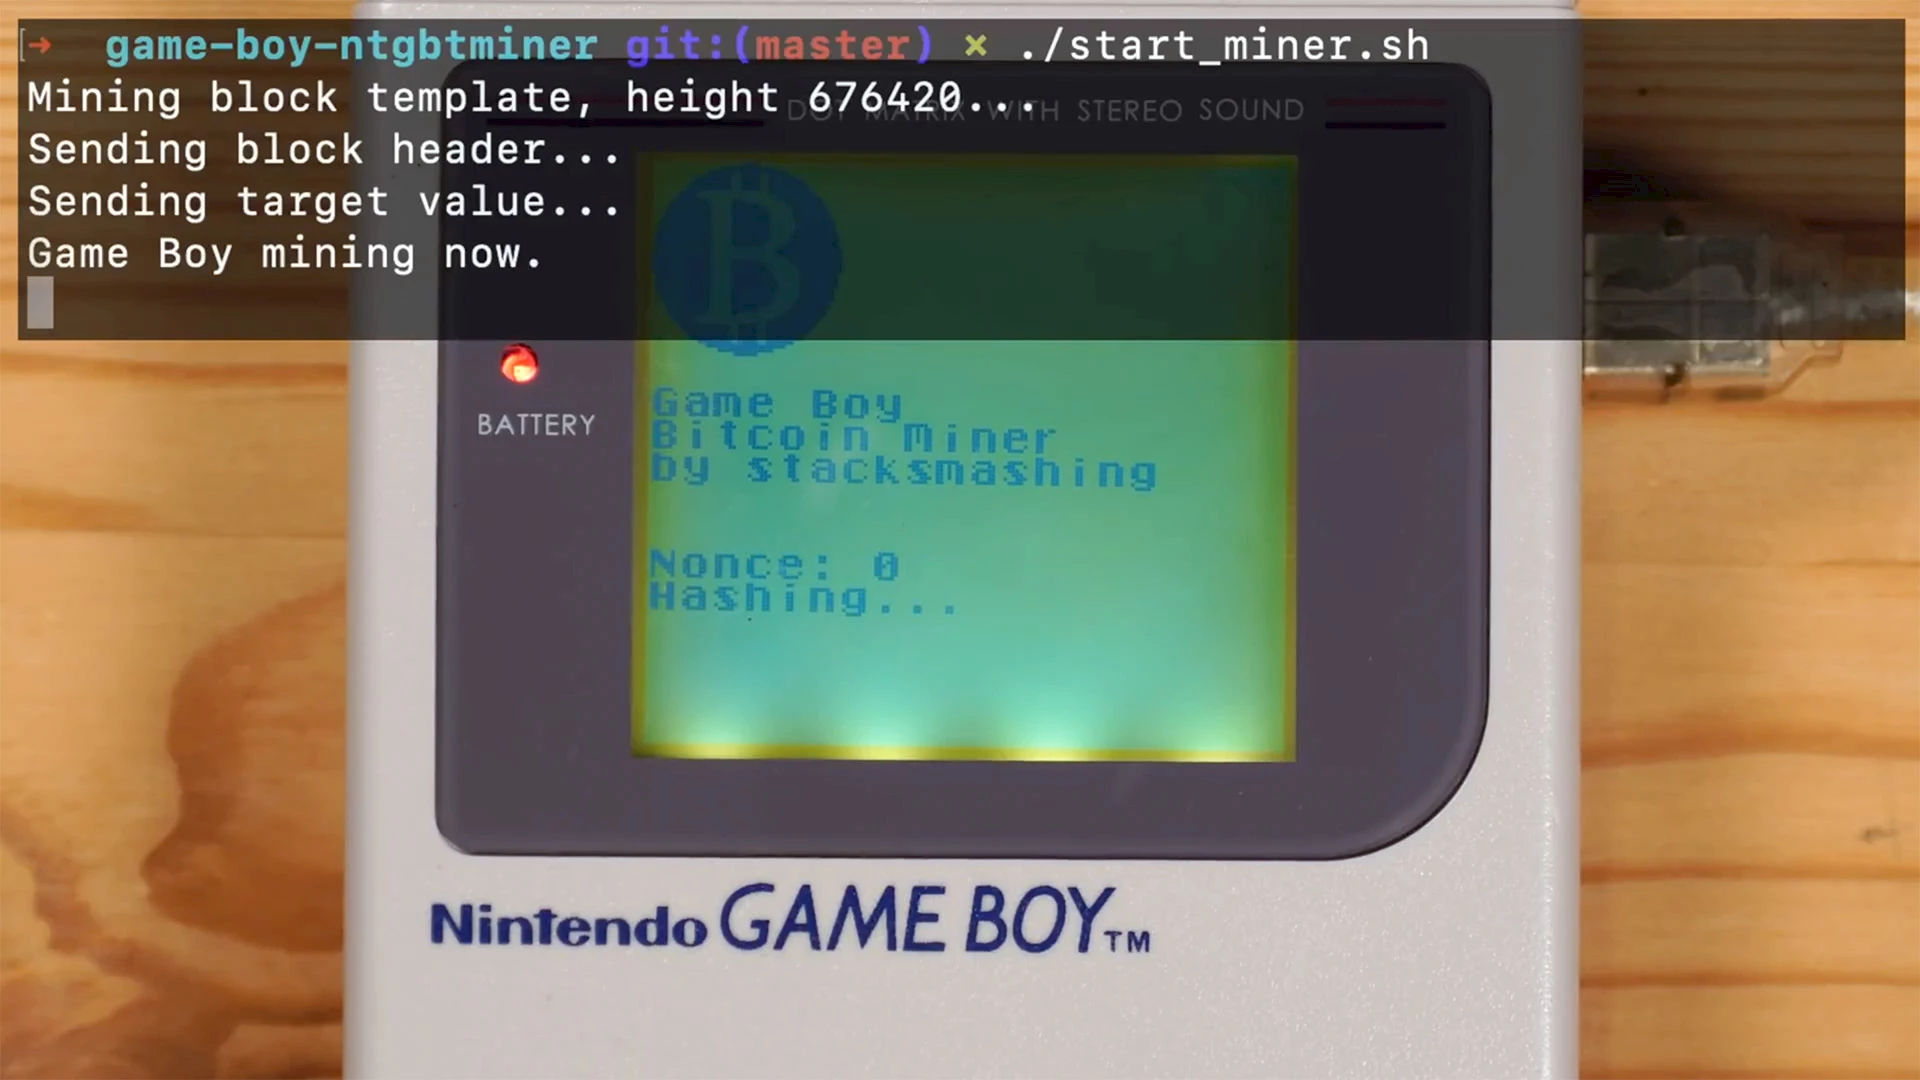 Mining Bitcoin on the Game Boy.